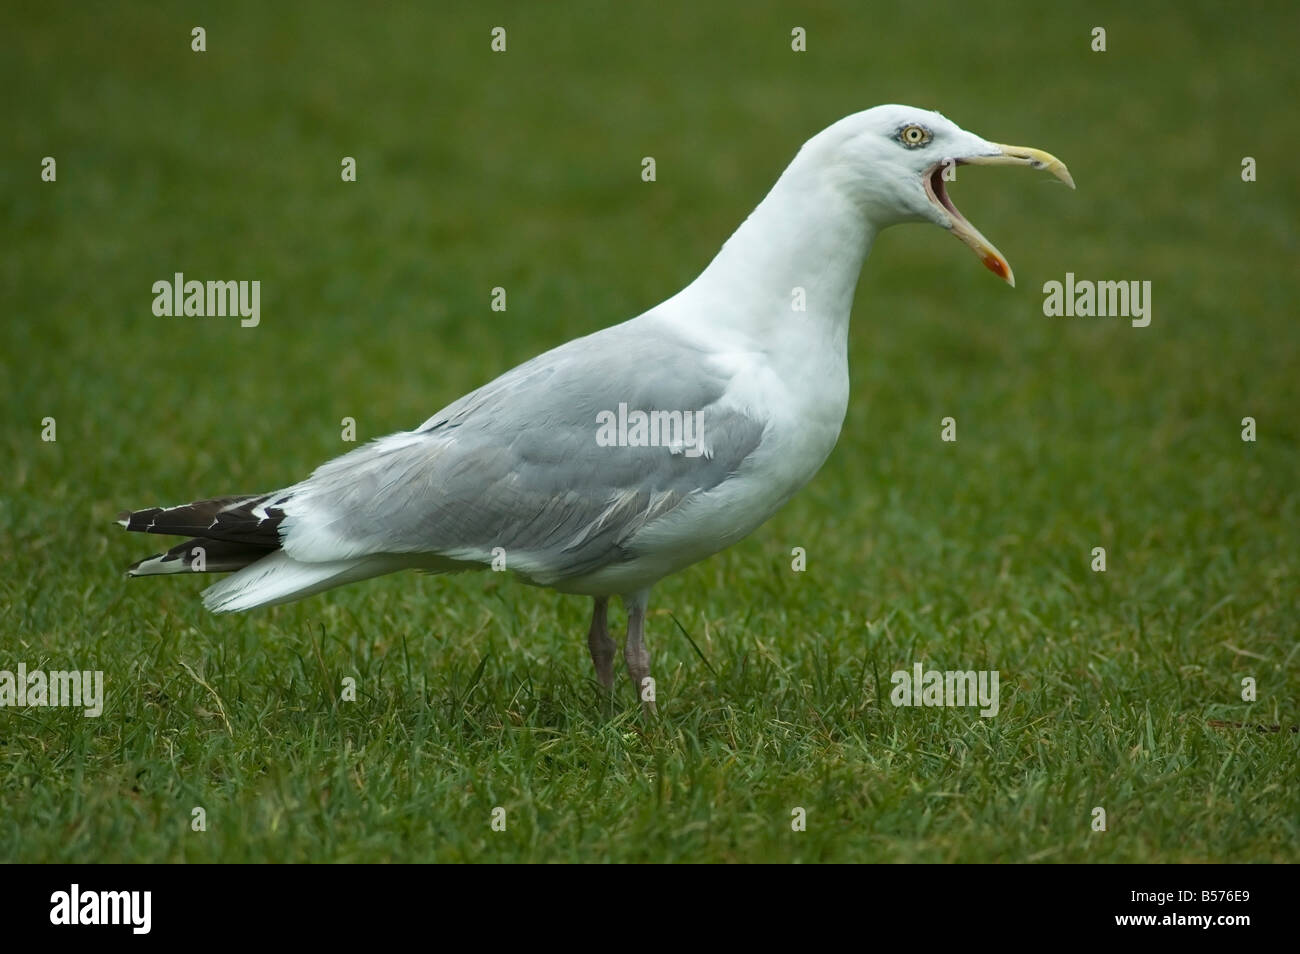 Seagull standing on grass shouting at someone Stock Photo